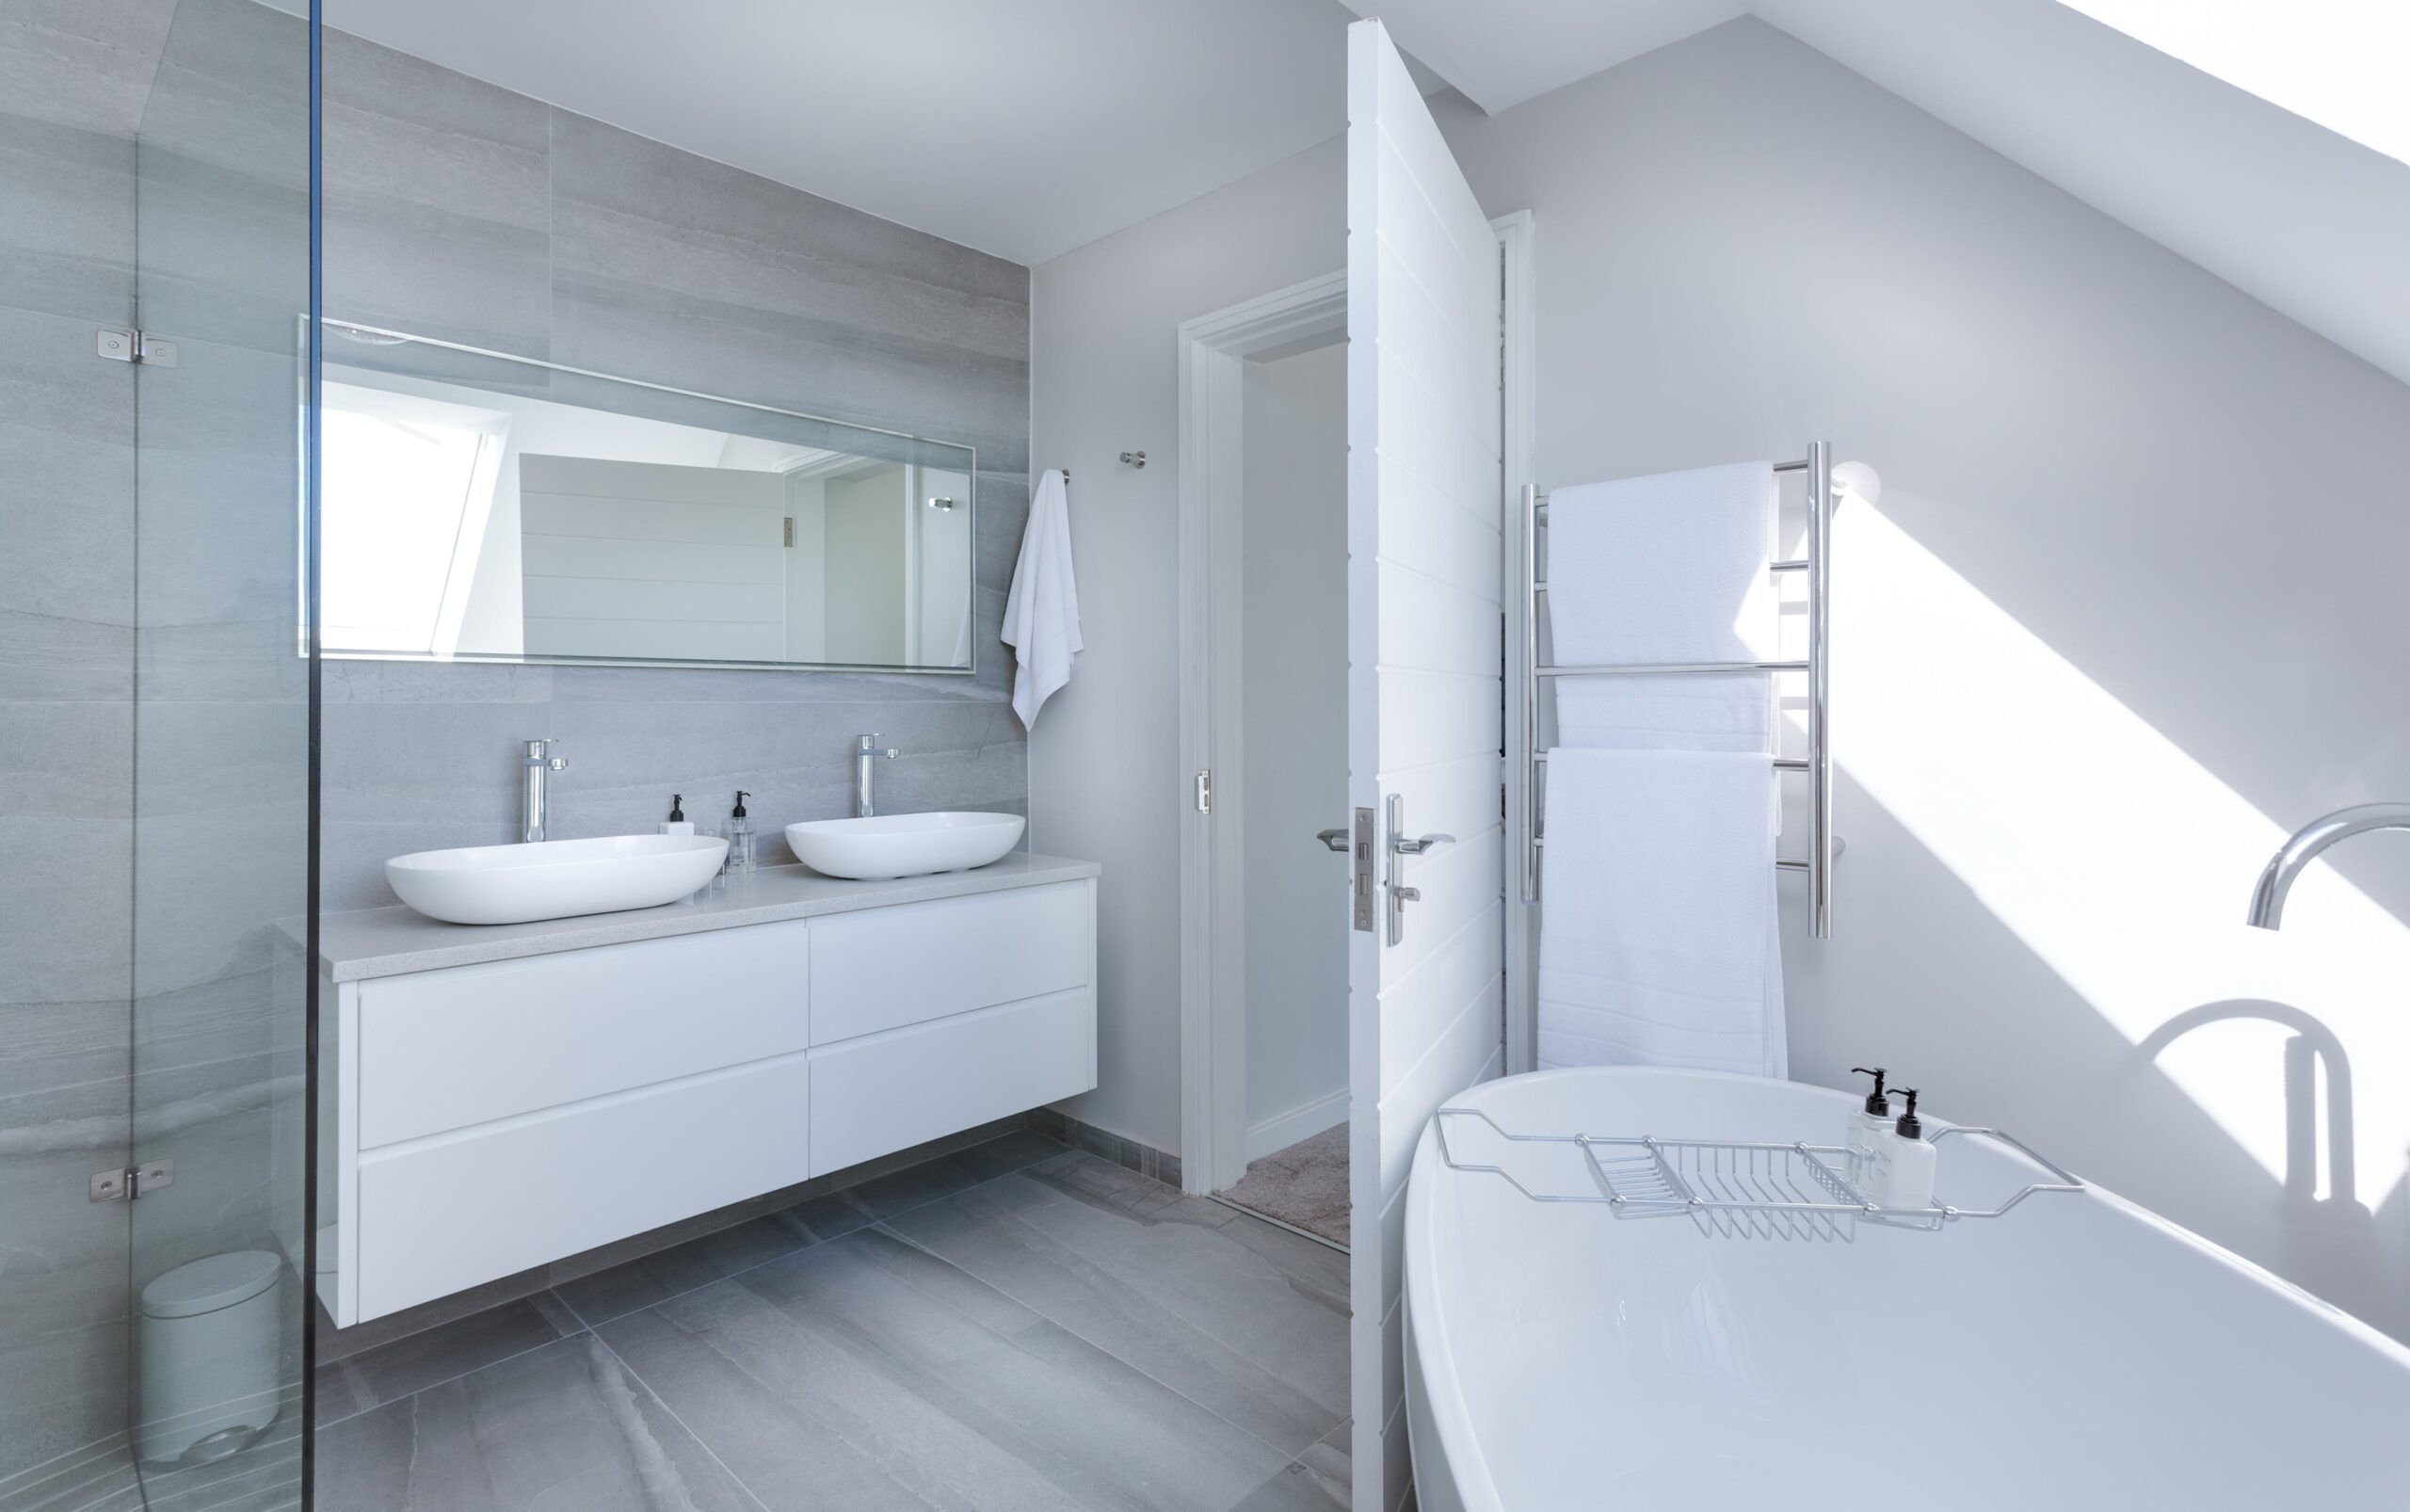 Designing Delight The Hidden Advantages of a Thoughtfully Crafted Bathroom